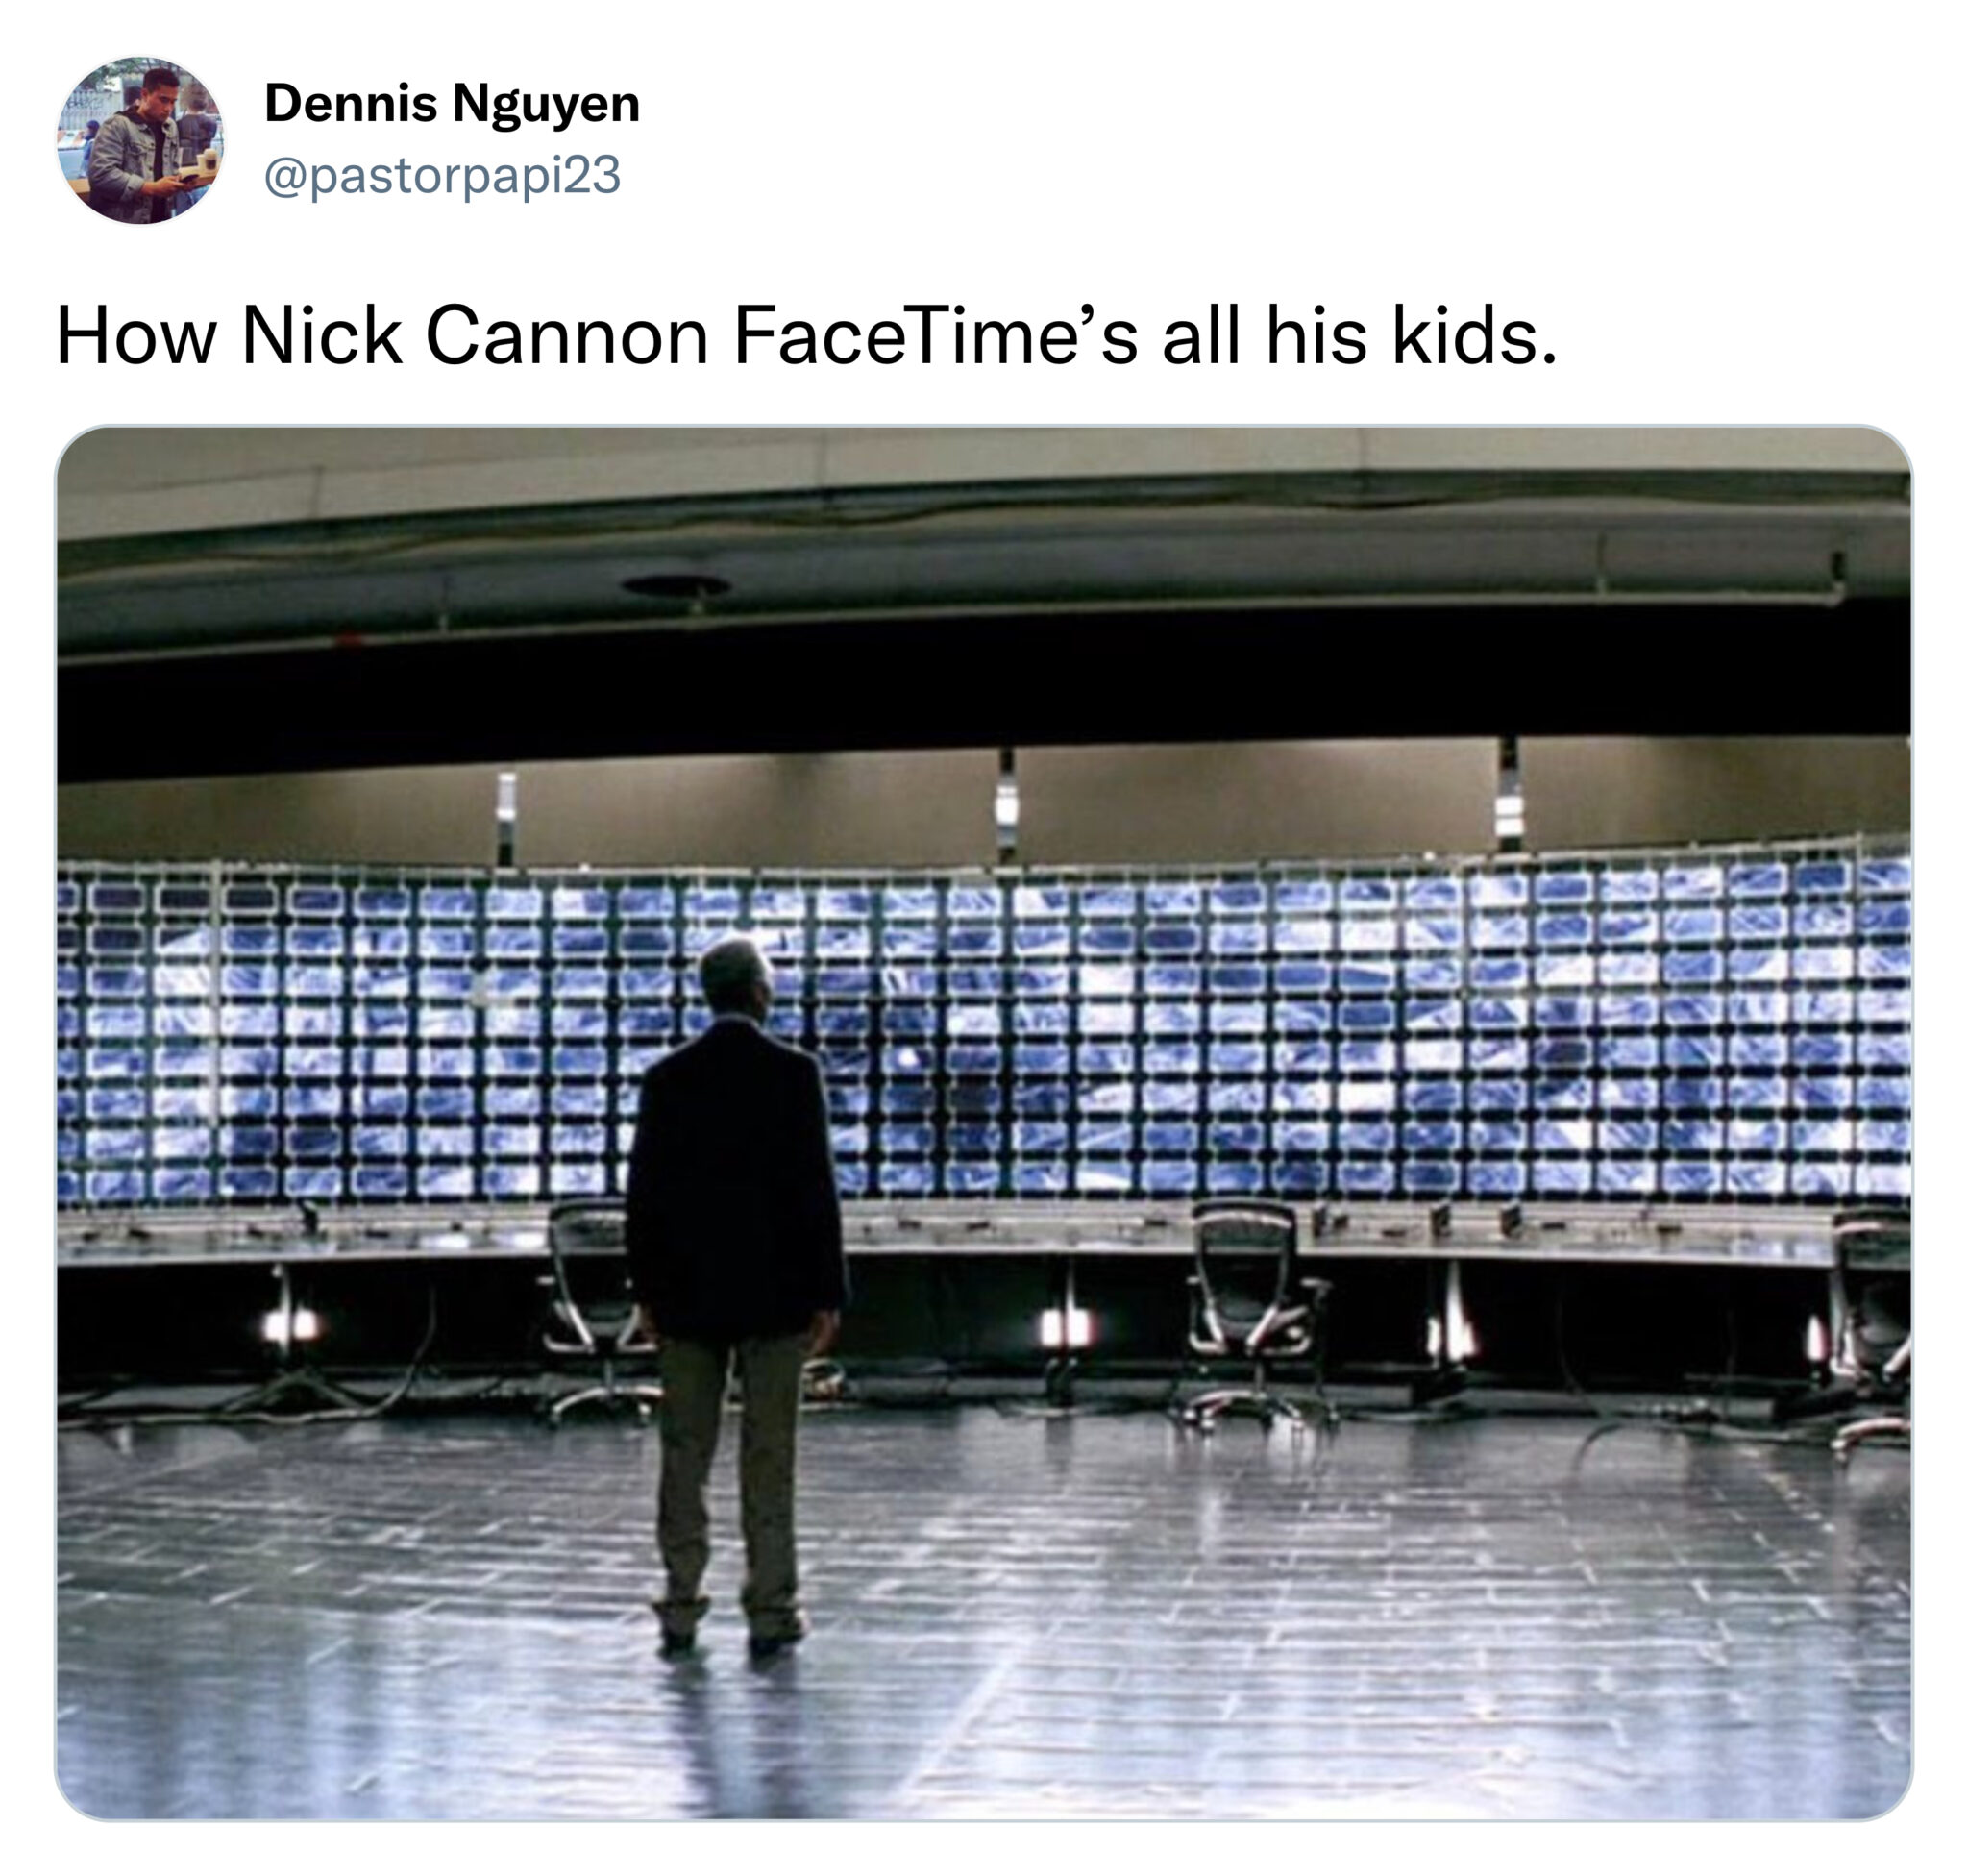 Monday Morning Randomness - display device - Dennis Nguyen How Nick Cannon FaceTime's all his kids. 25